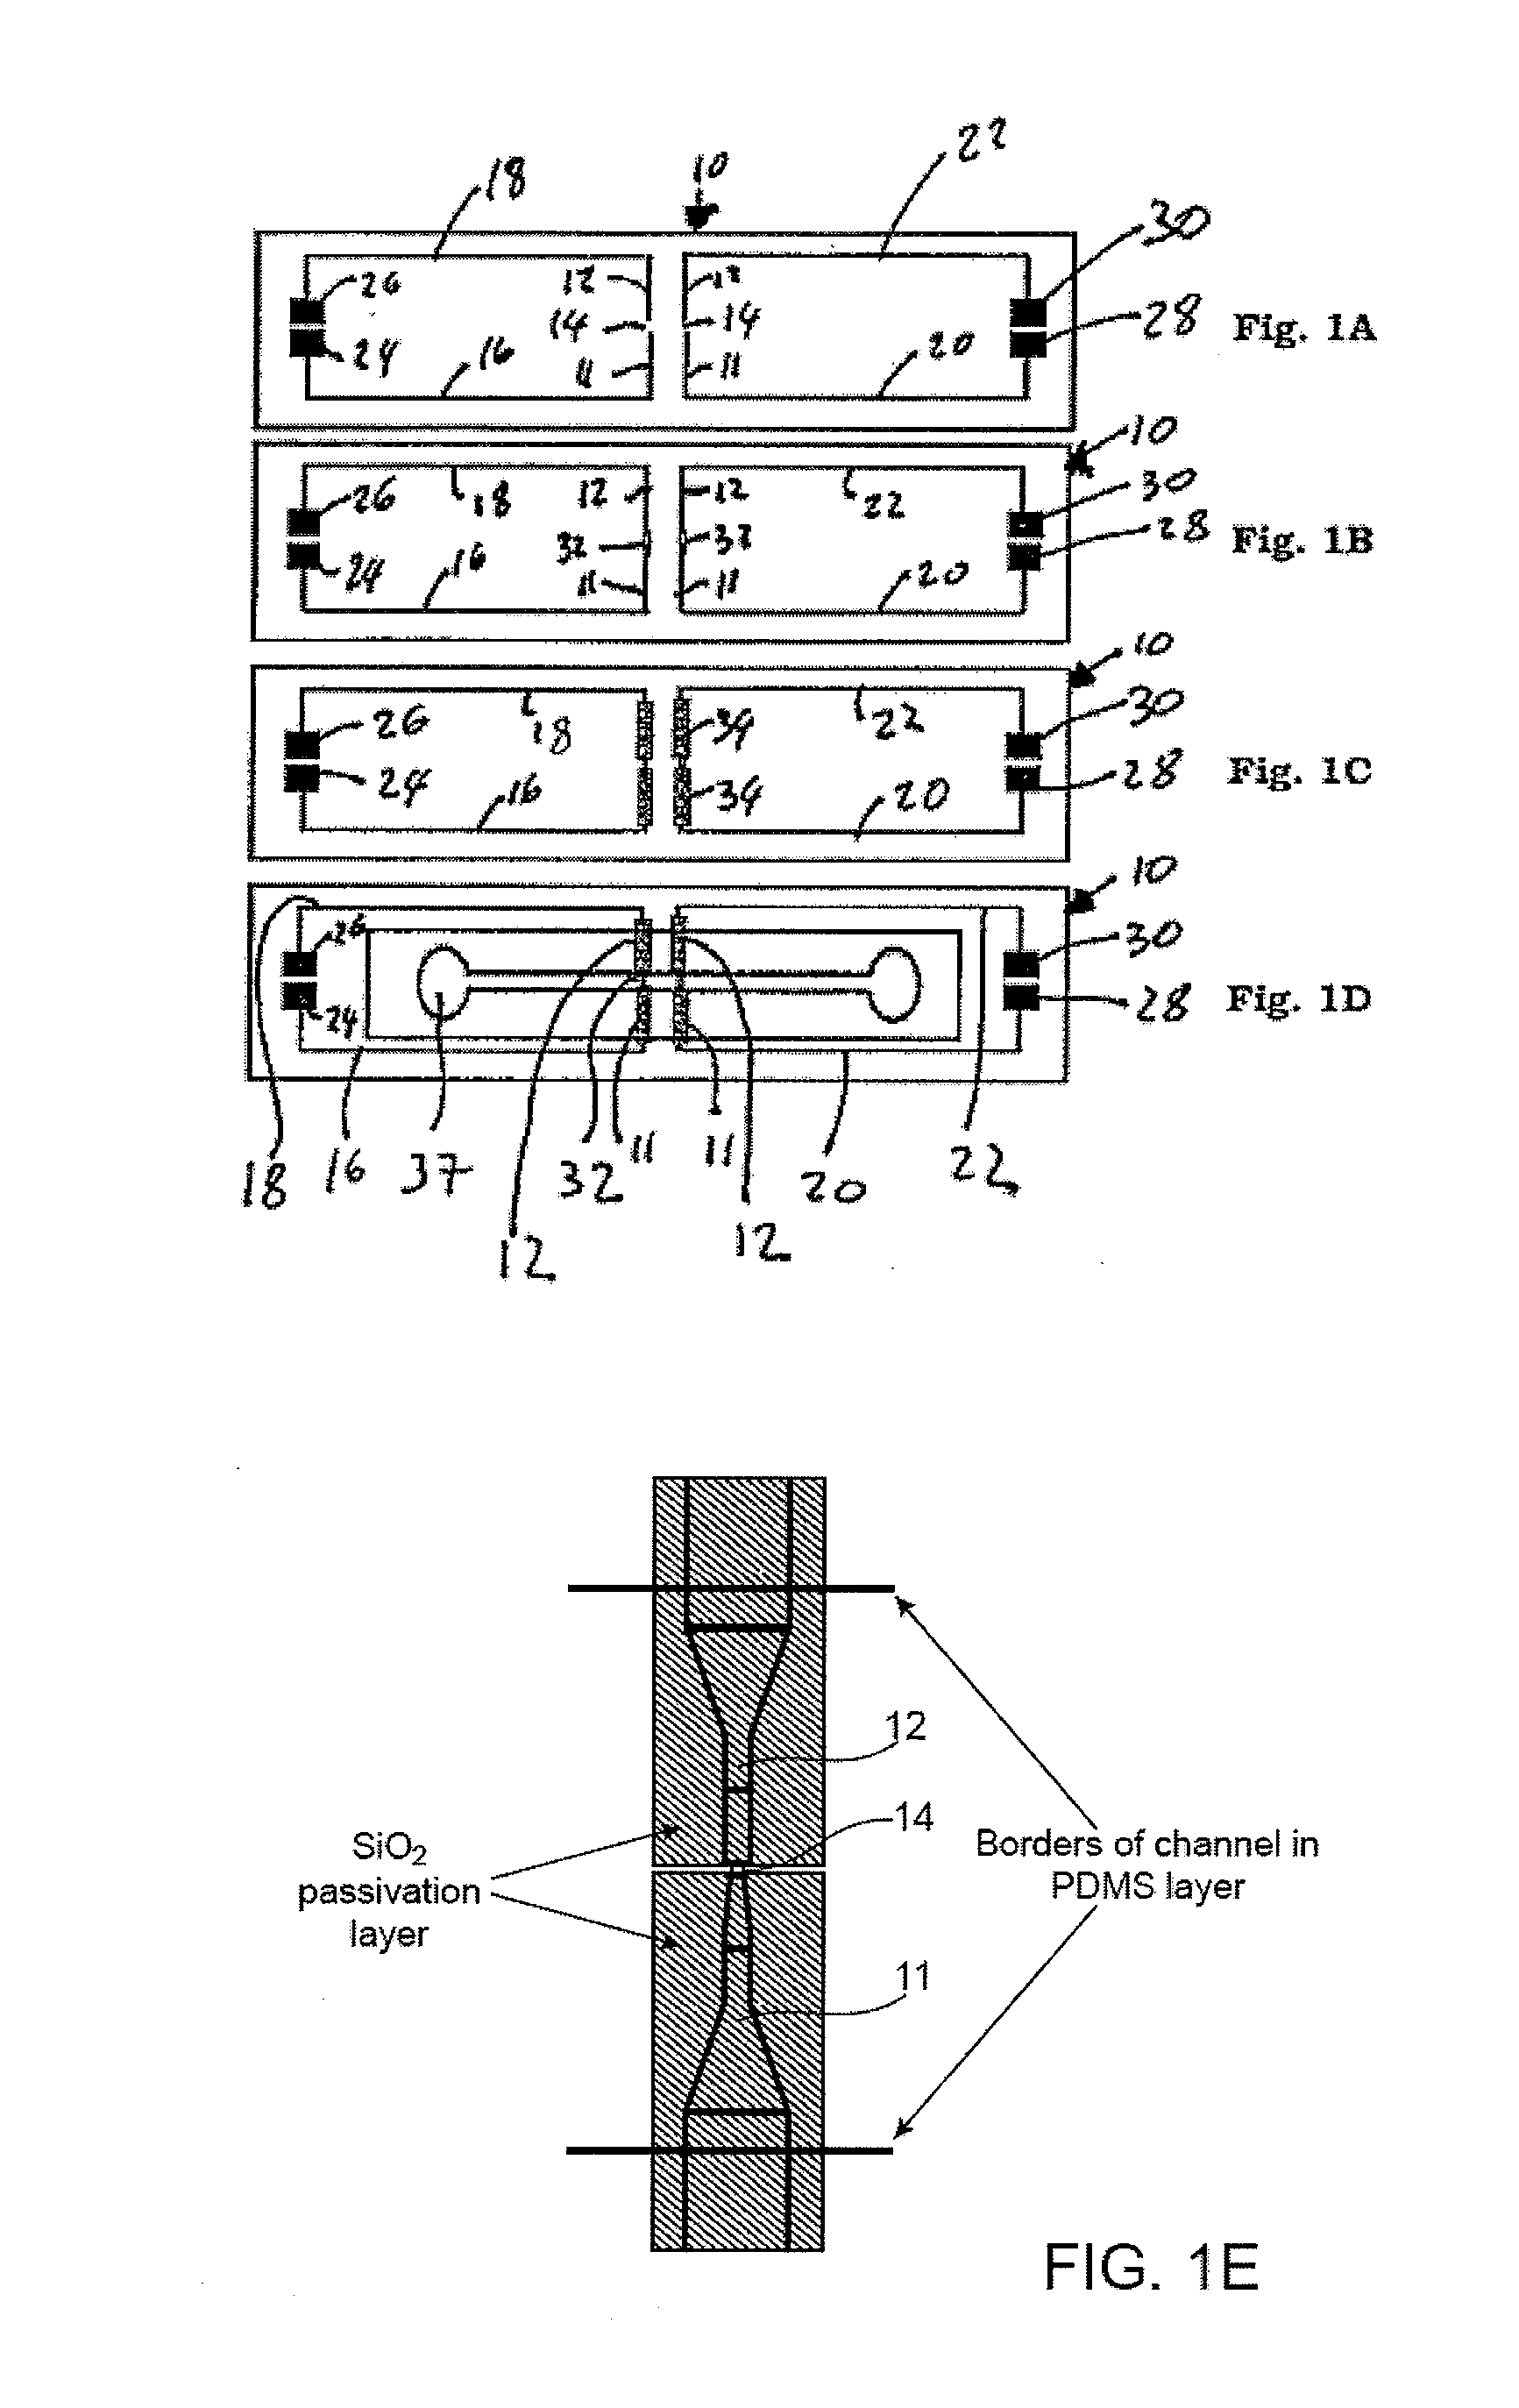 Apparatus and method for detecting one or more analytes